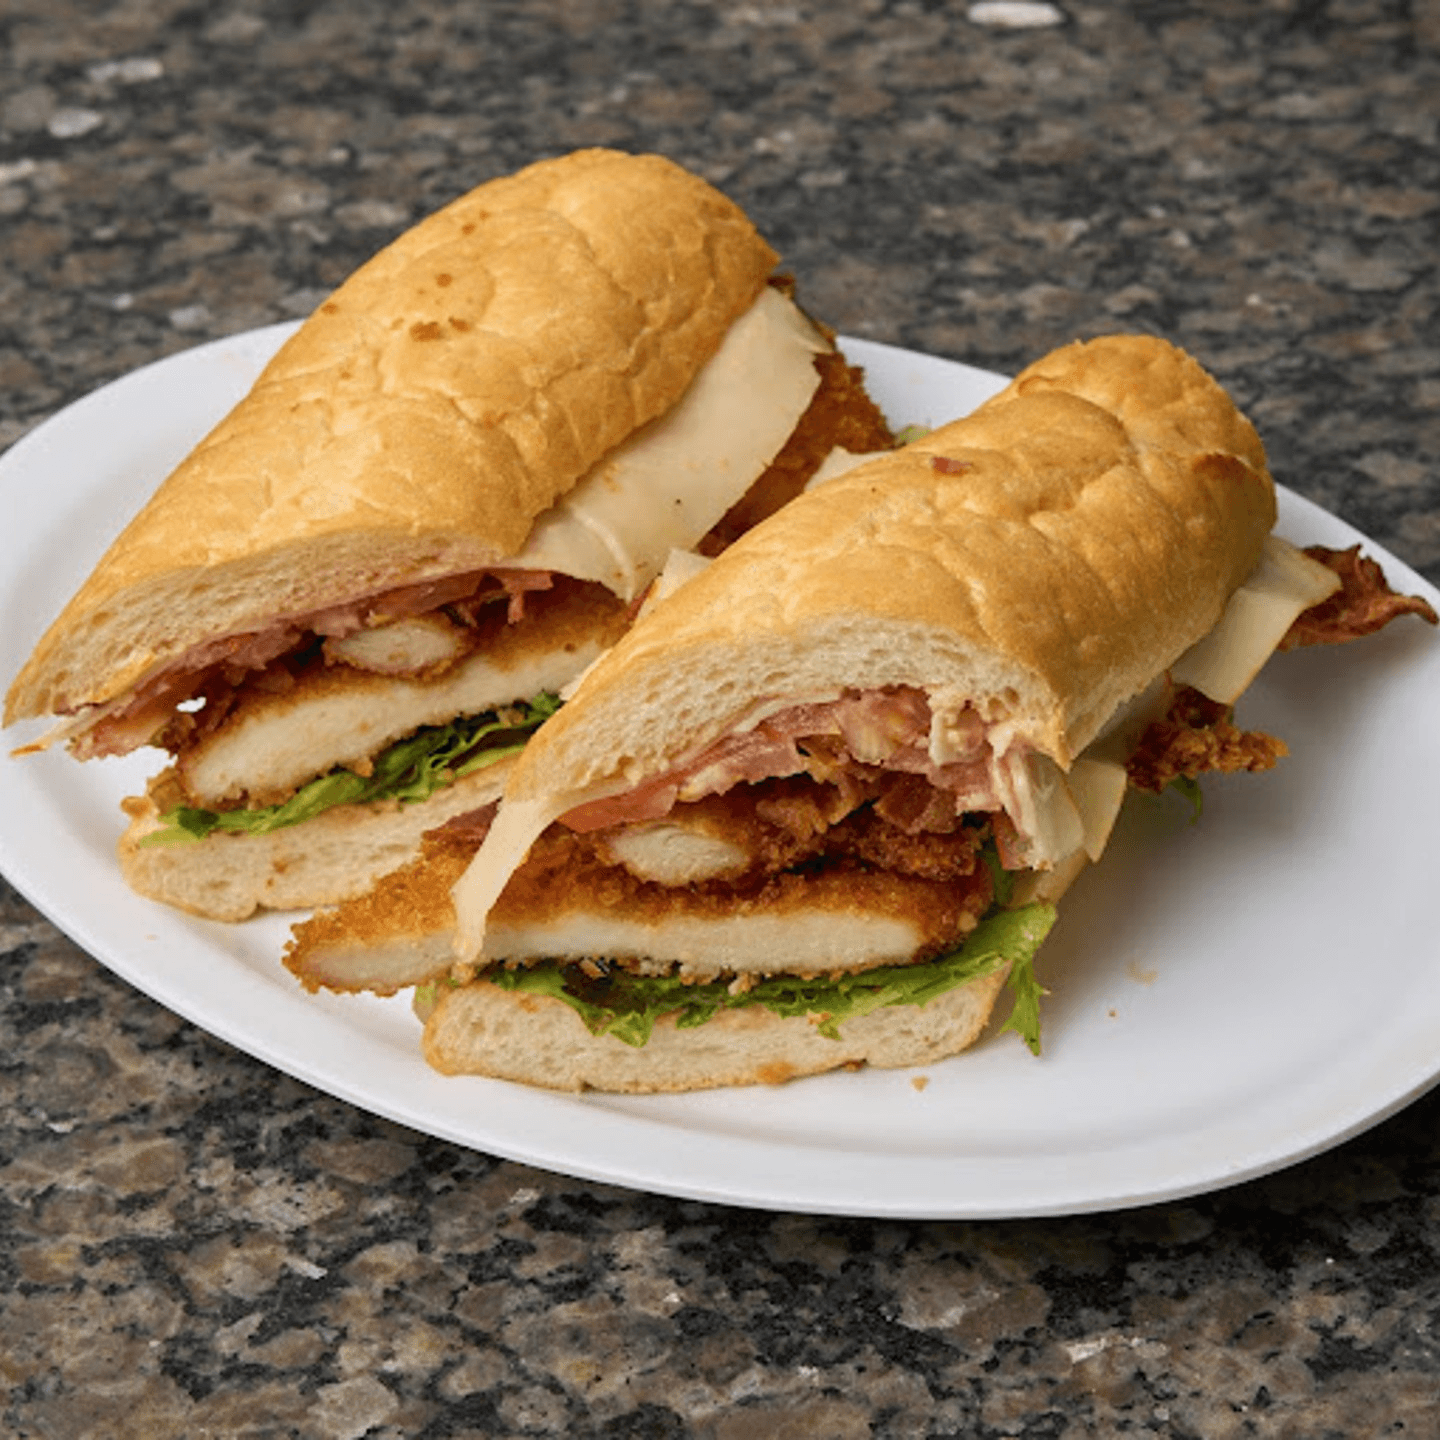 The Best Sandwiches in the City